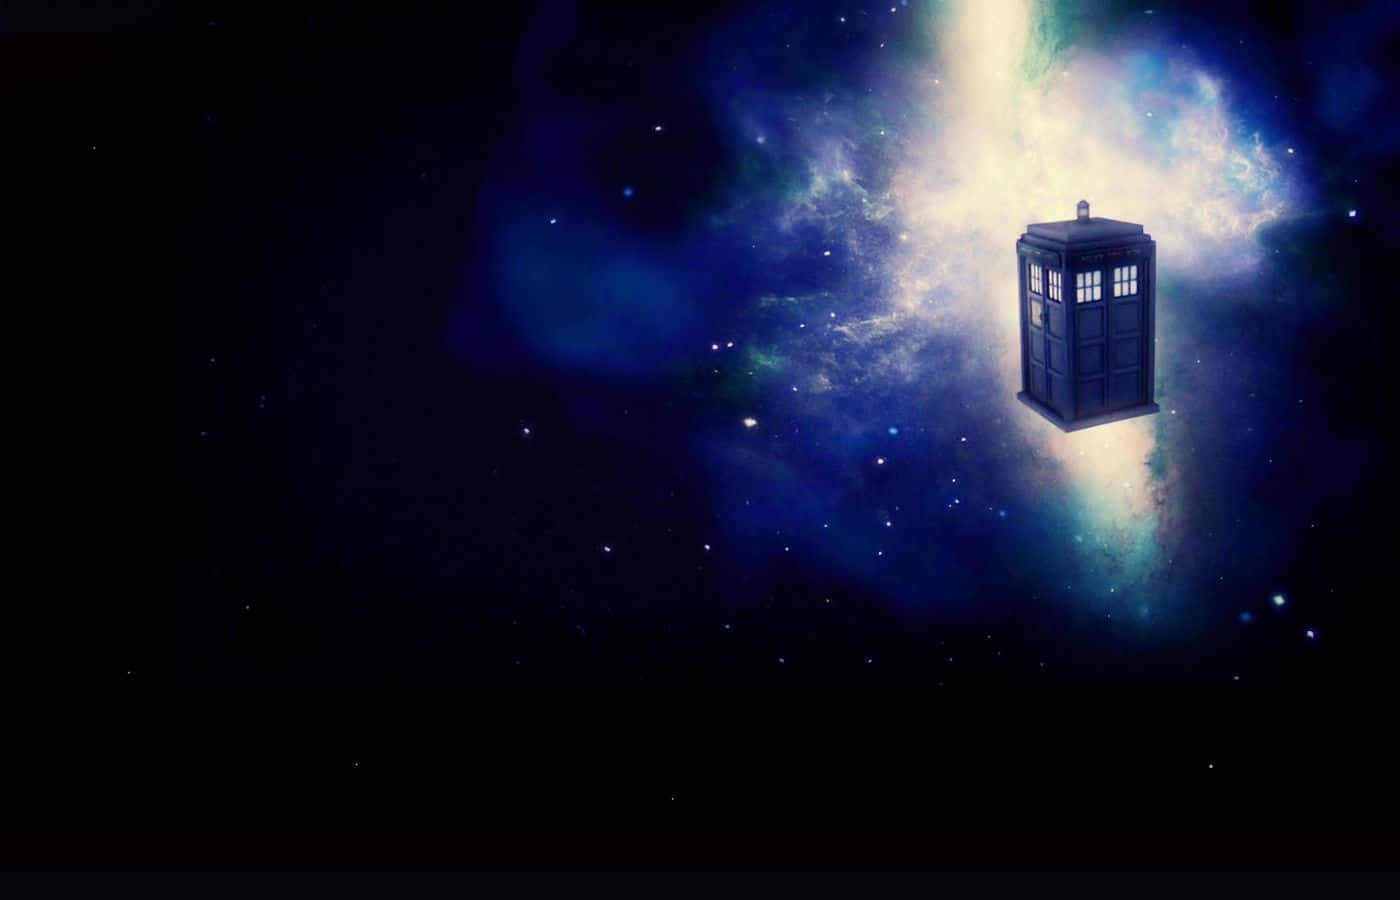 Tardisflyter I Rymden (note: Tardis Refers To The Fictional Time Machine From The Tv Show Doctor Who) Wallpaper